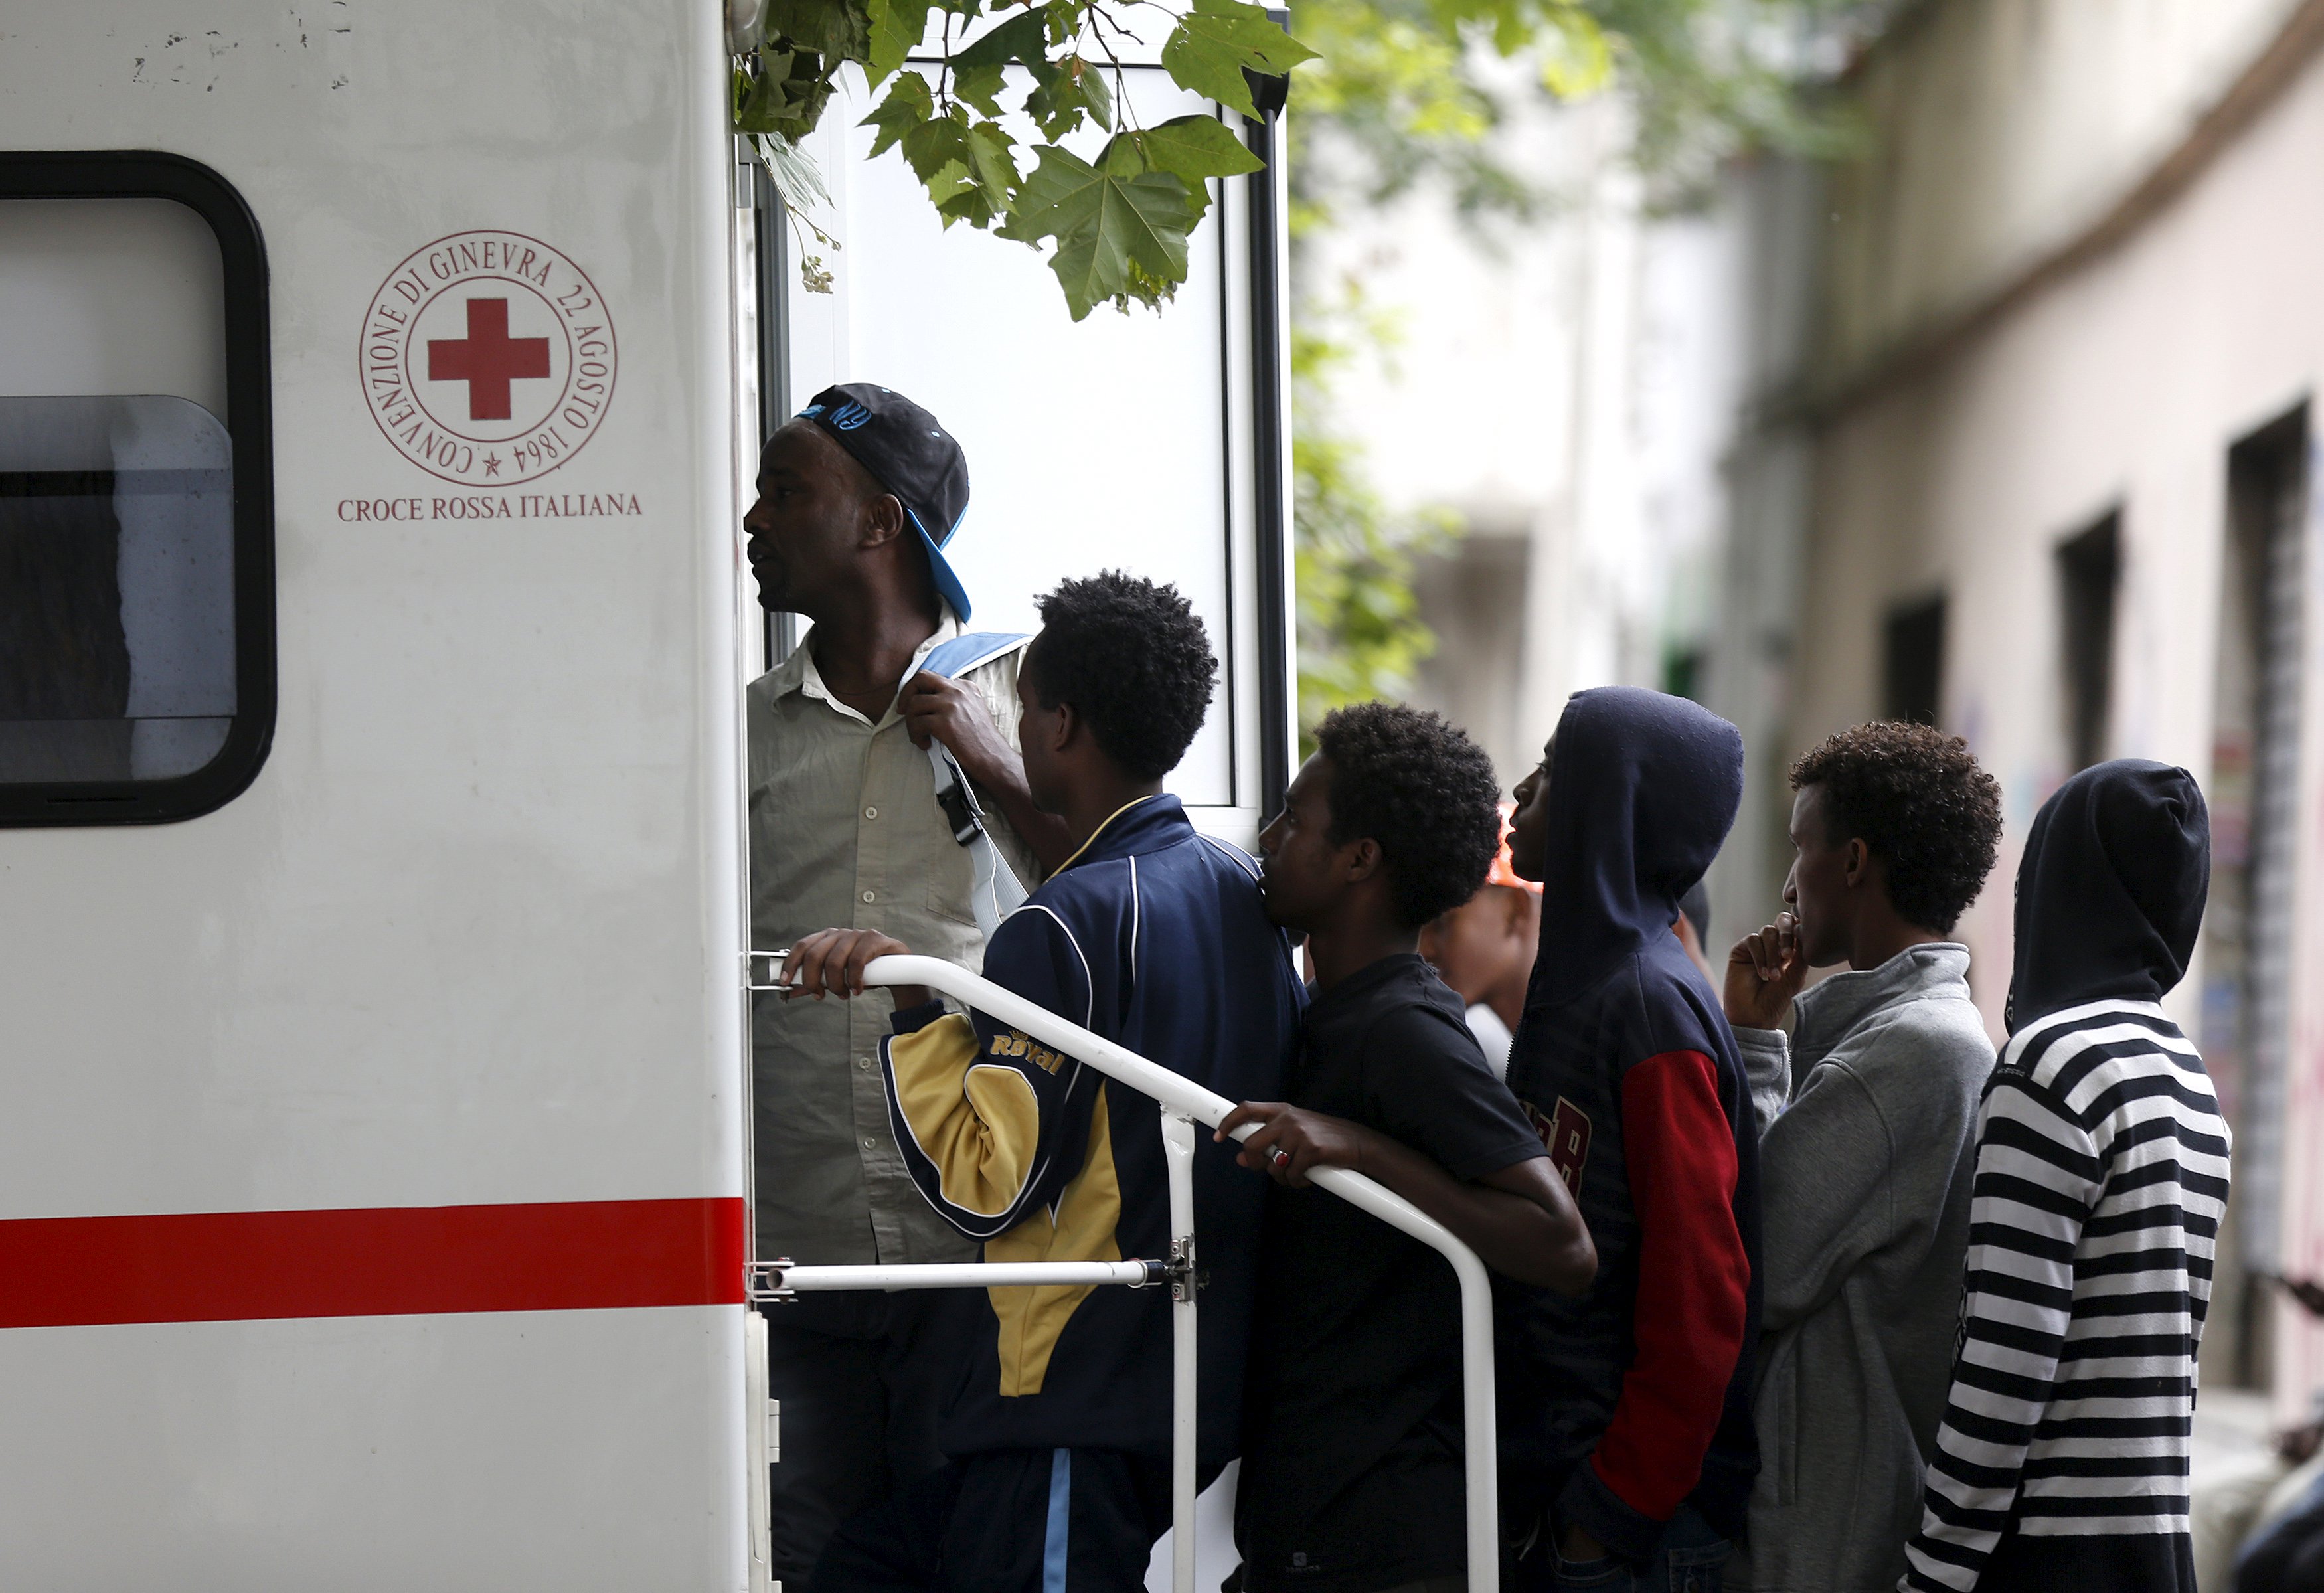 Migrants await a visit by Red Cross in front of the migration centre next to the Tiburtina station in Rome, June 12, 2015.